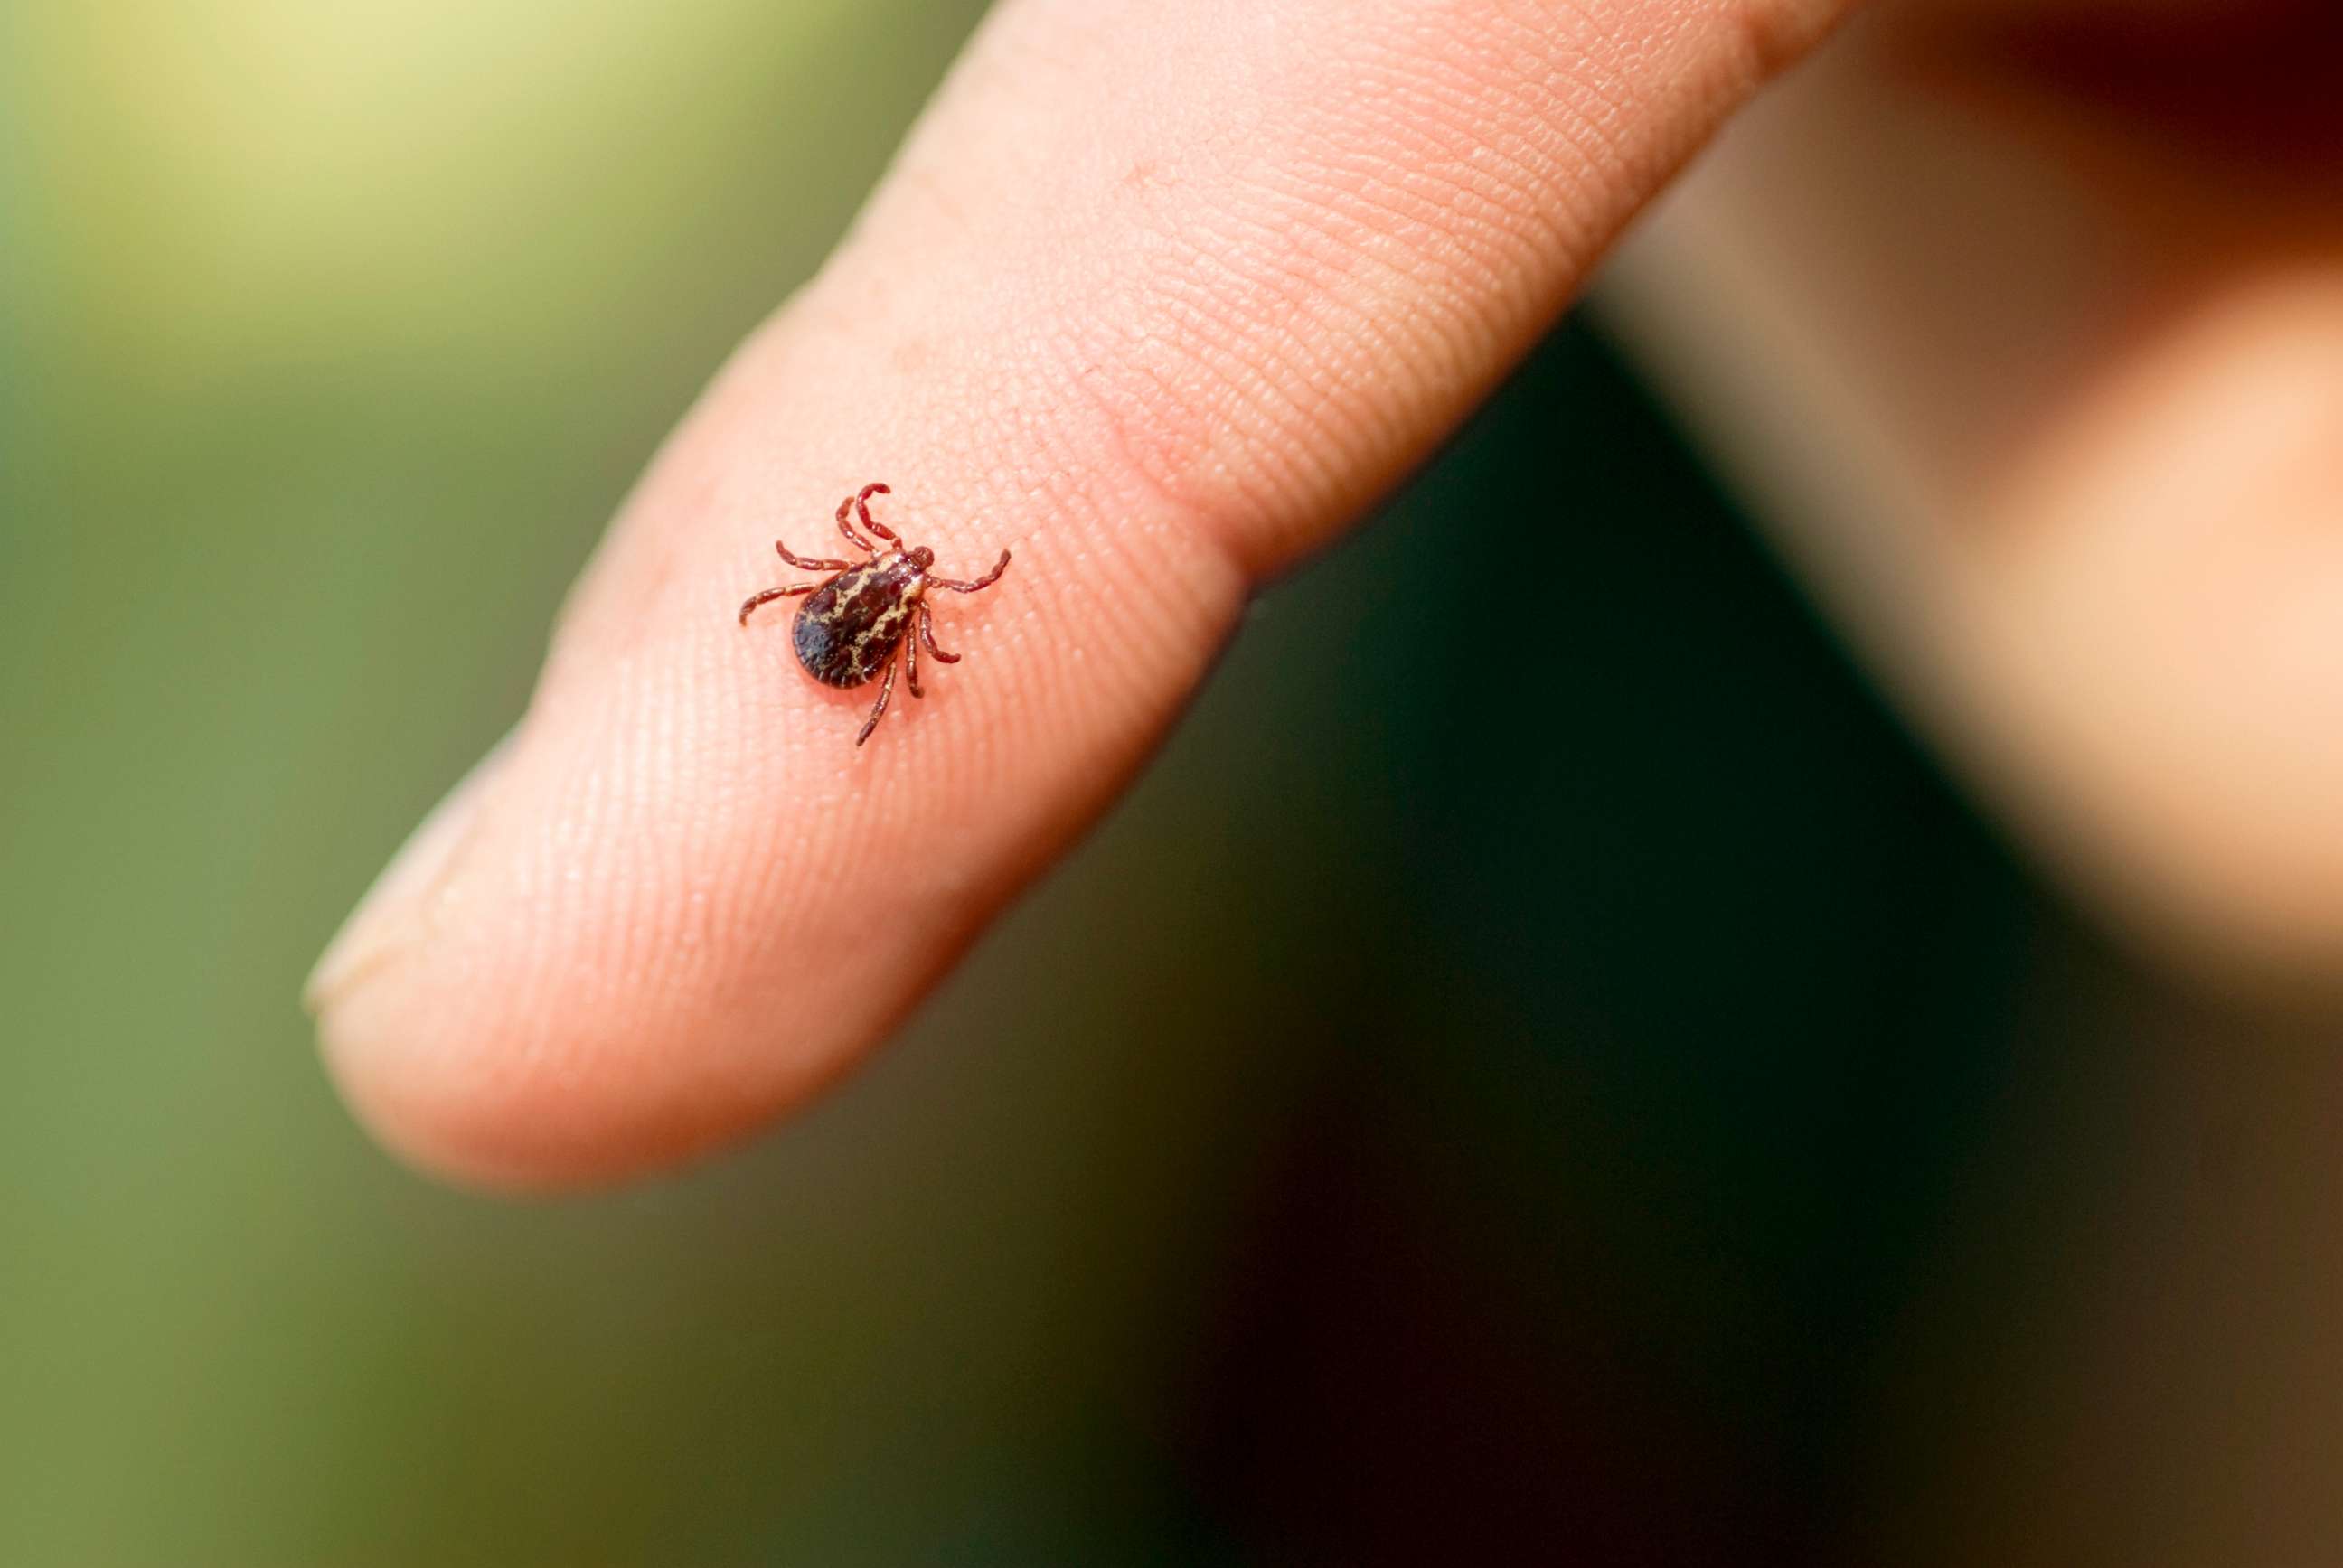 PHOTO: Stock photo of a tick on a finger.